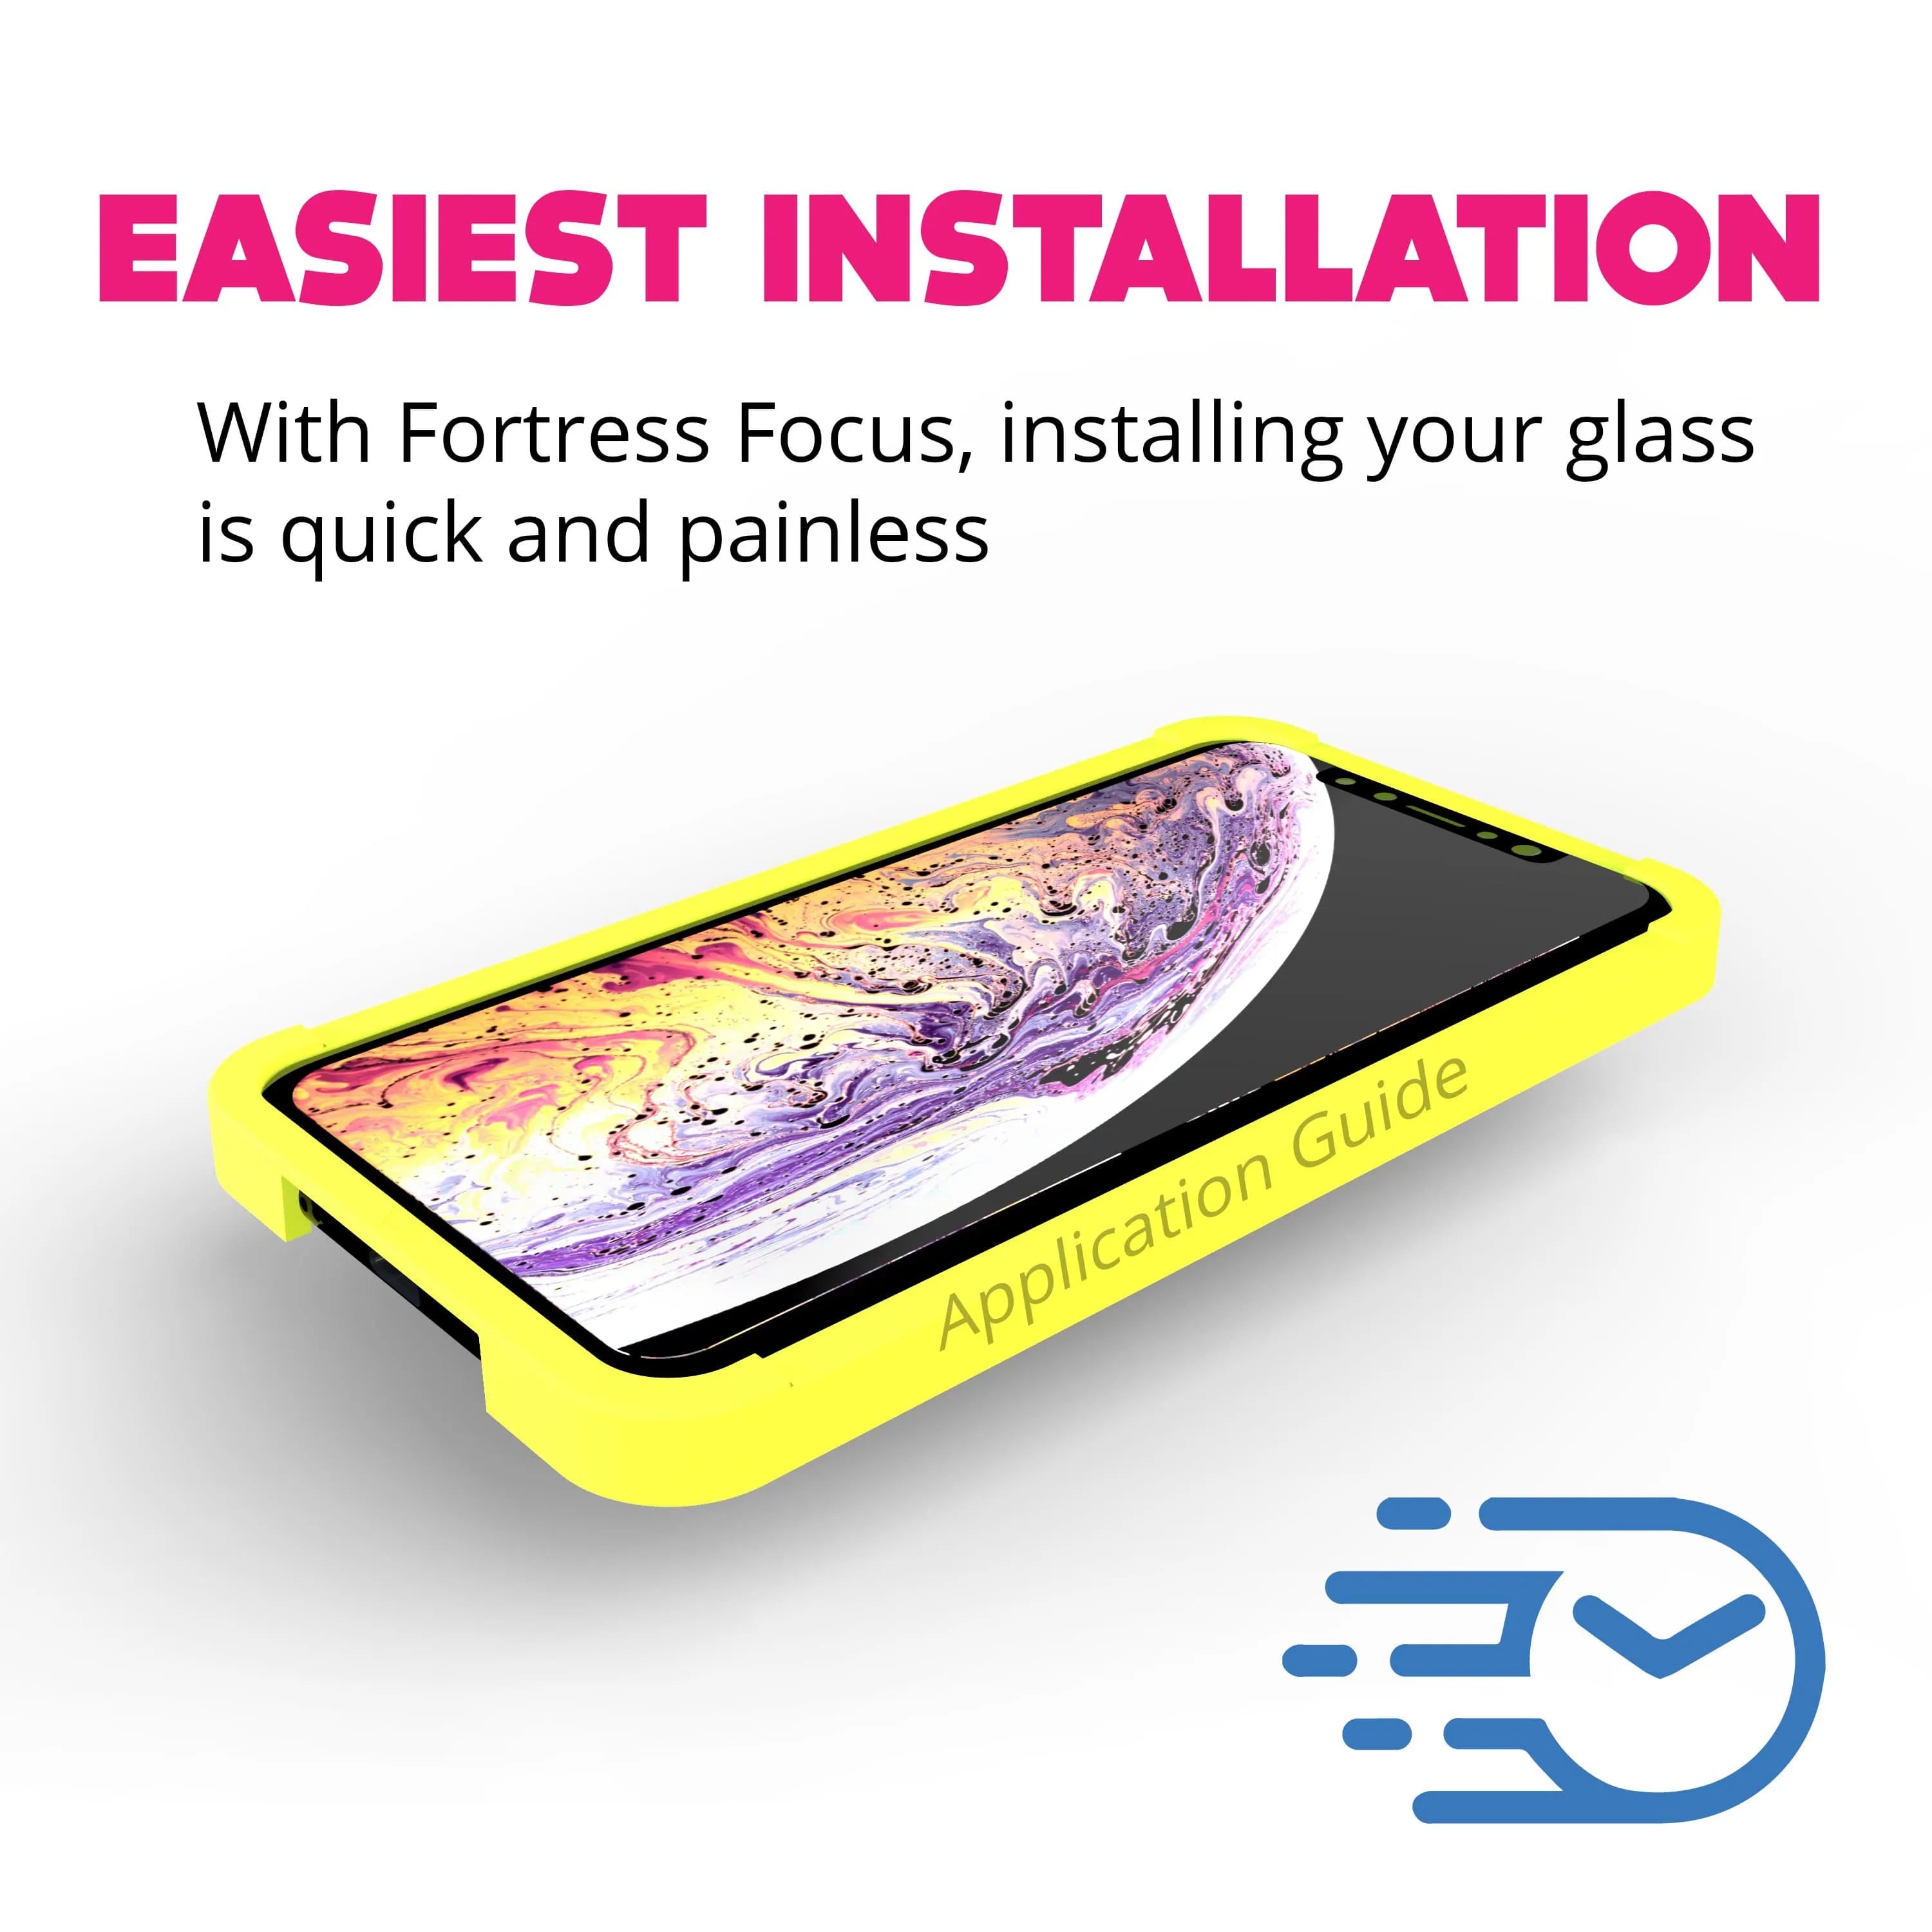 Fortress iPhone 13 Pro Max Screen Protector - $200 Device Coverage  Scooch Screen Protector